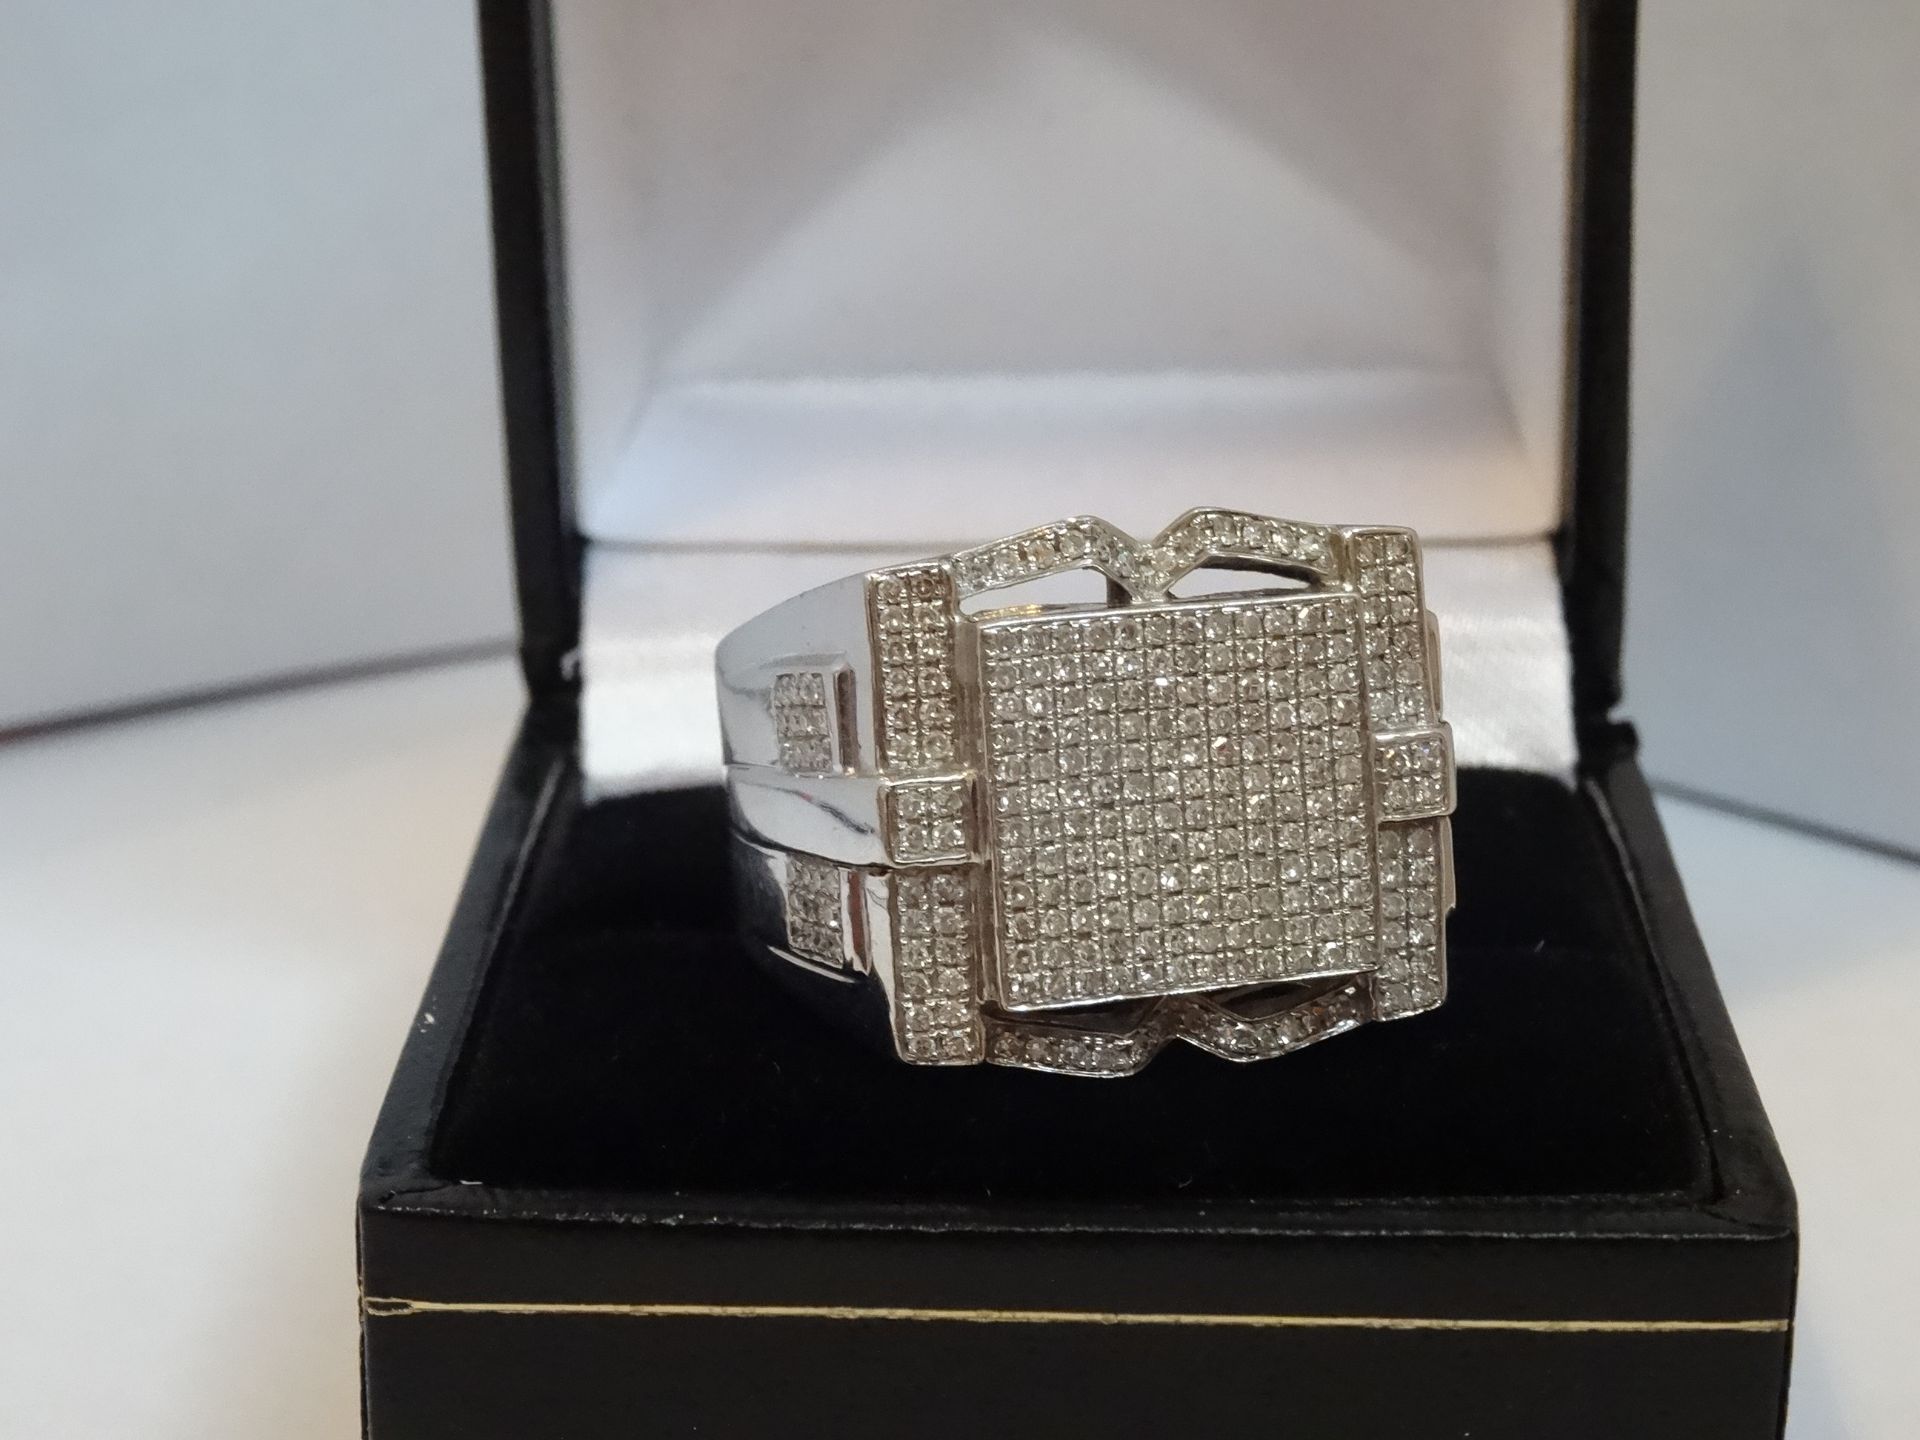 9 Carat White Gold Gents Signet Ring. Contains 1.55 Carats of Diamonds. - Image 2 of 6